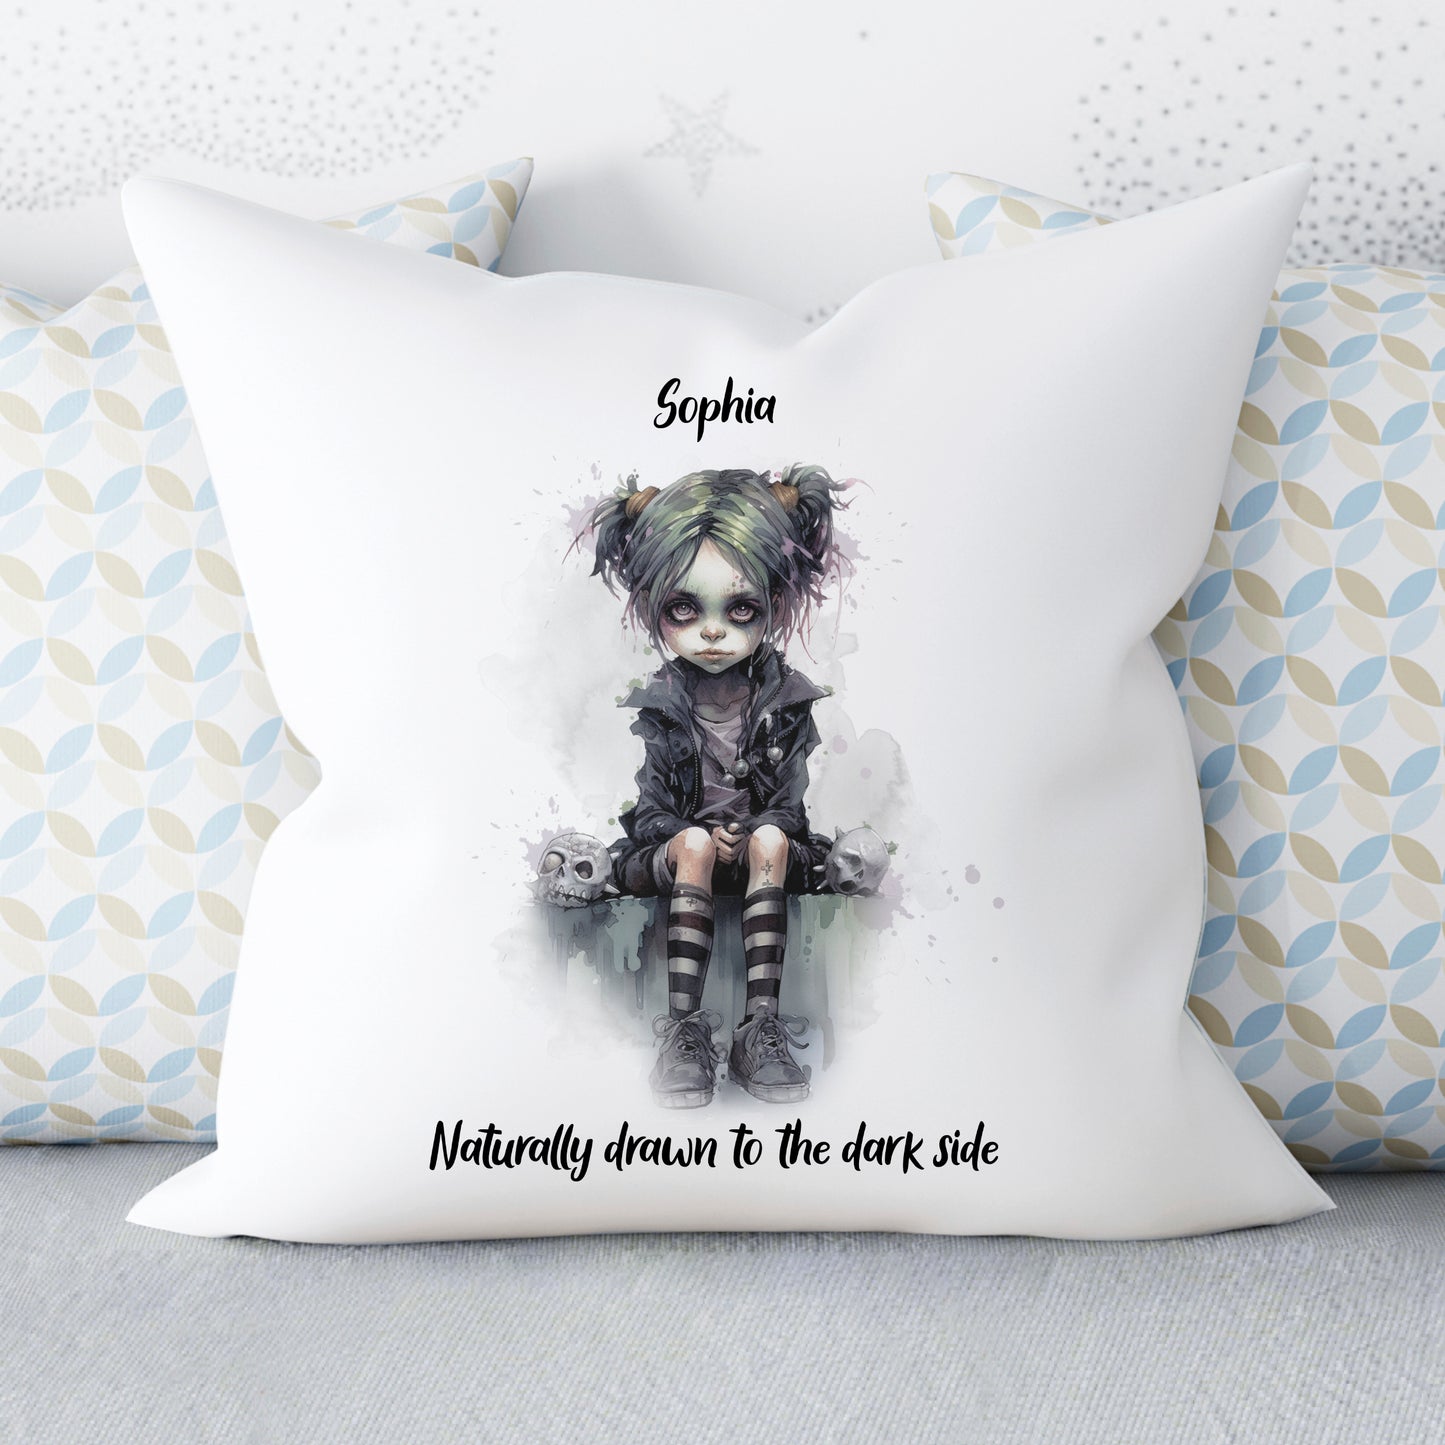 personalised-gothic-gifts